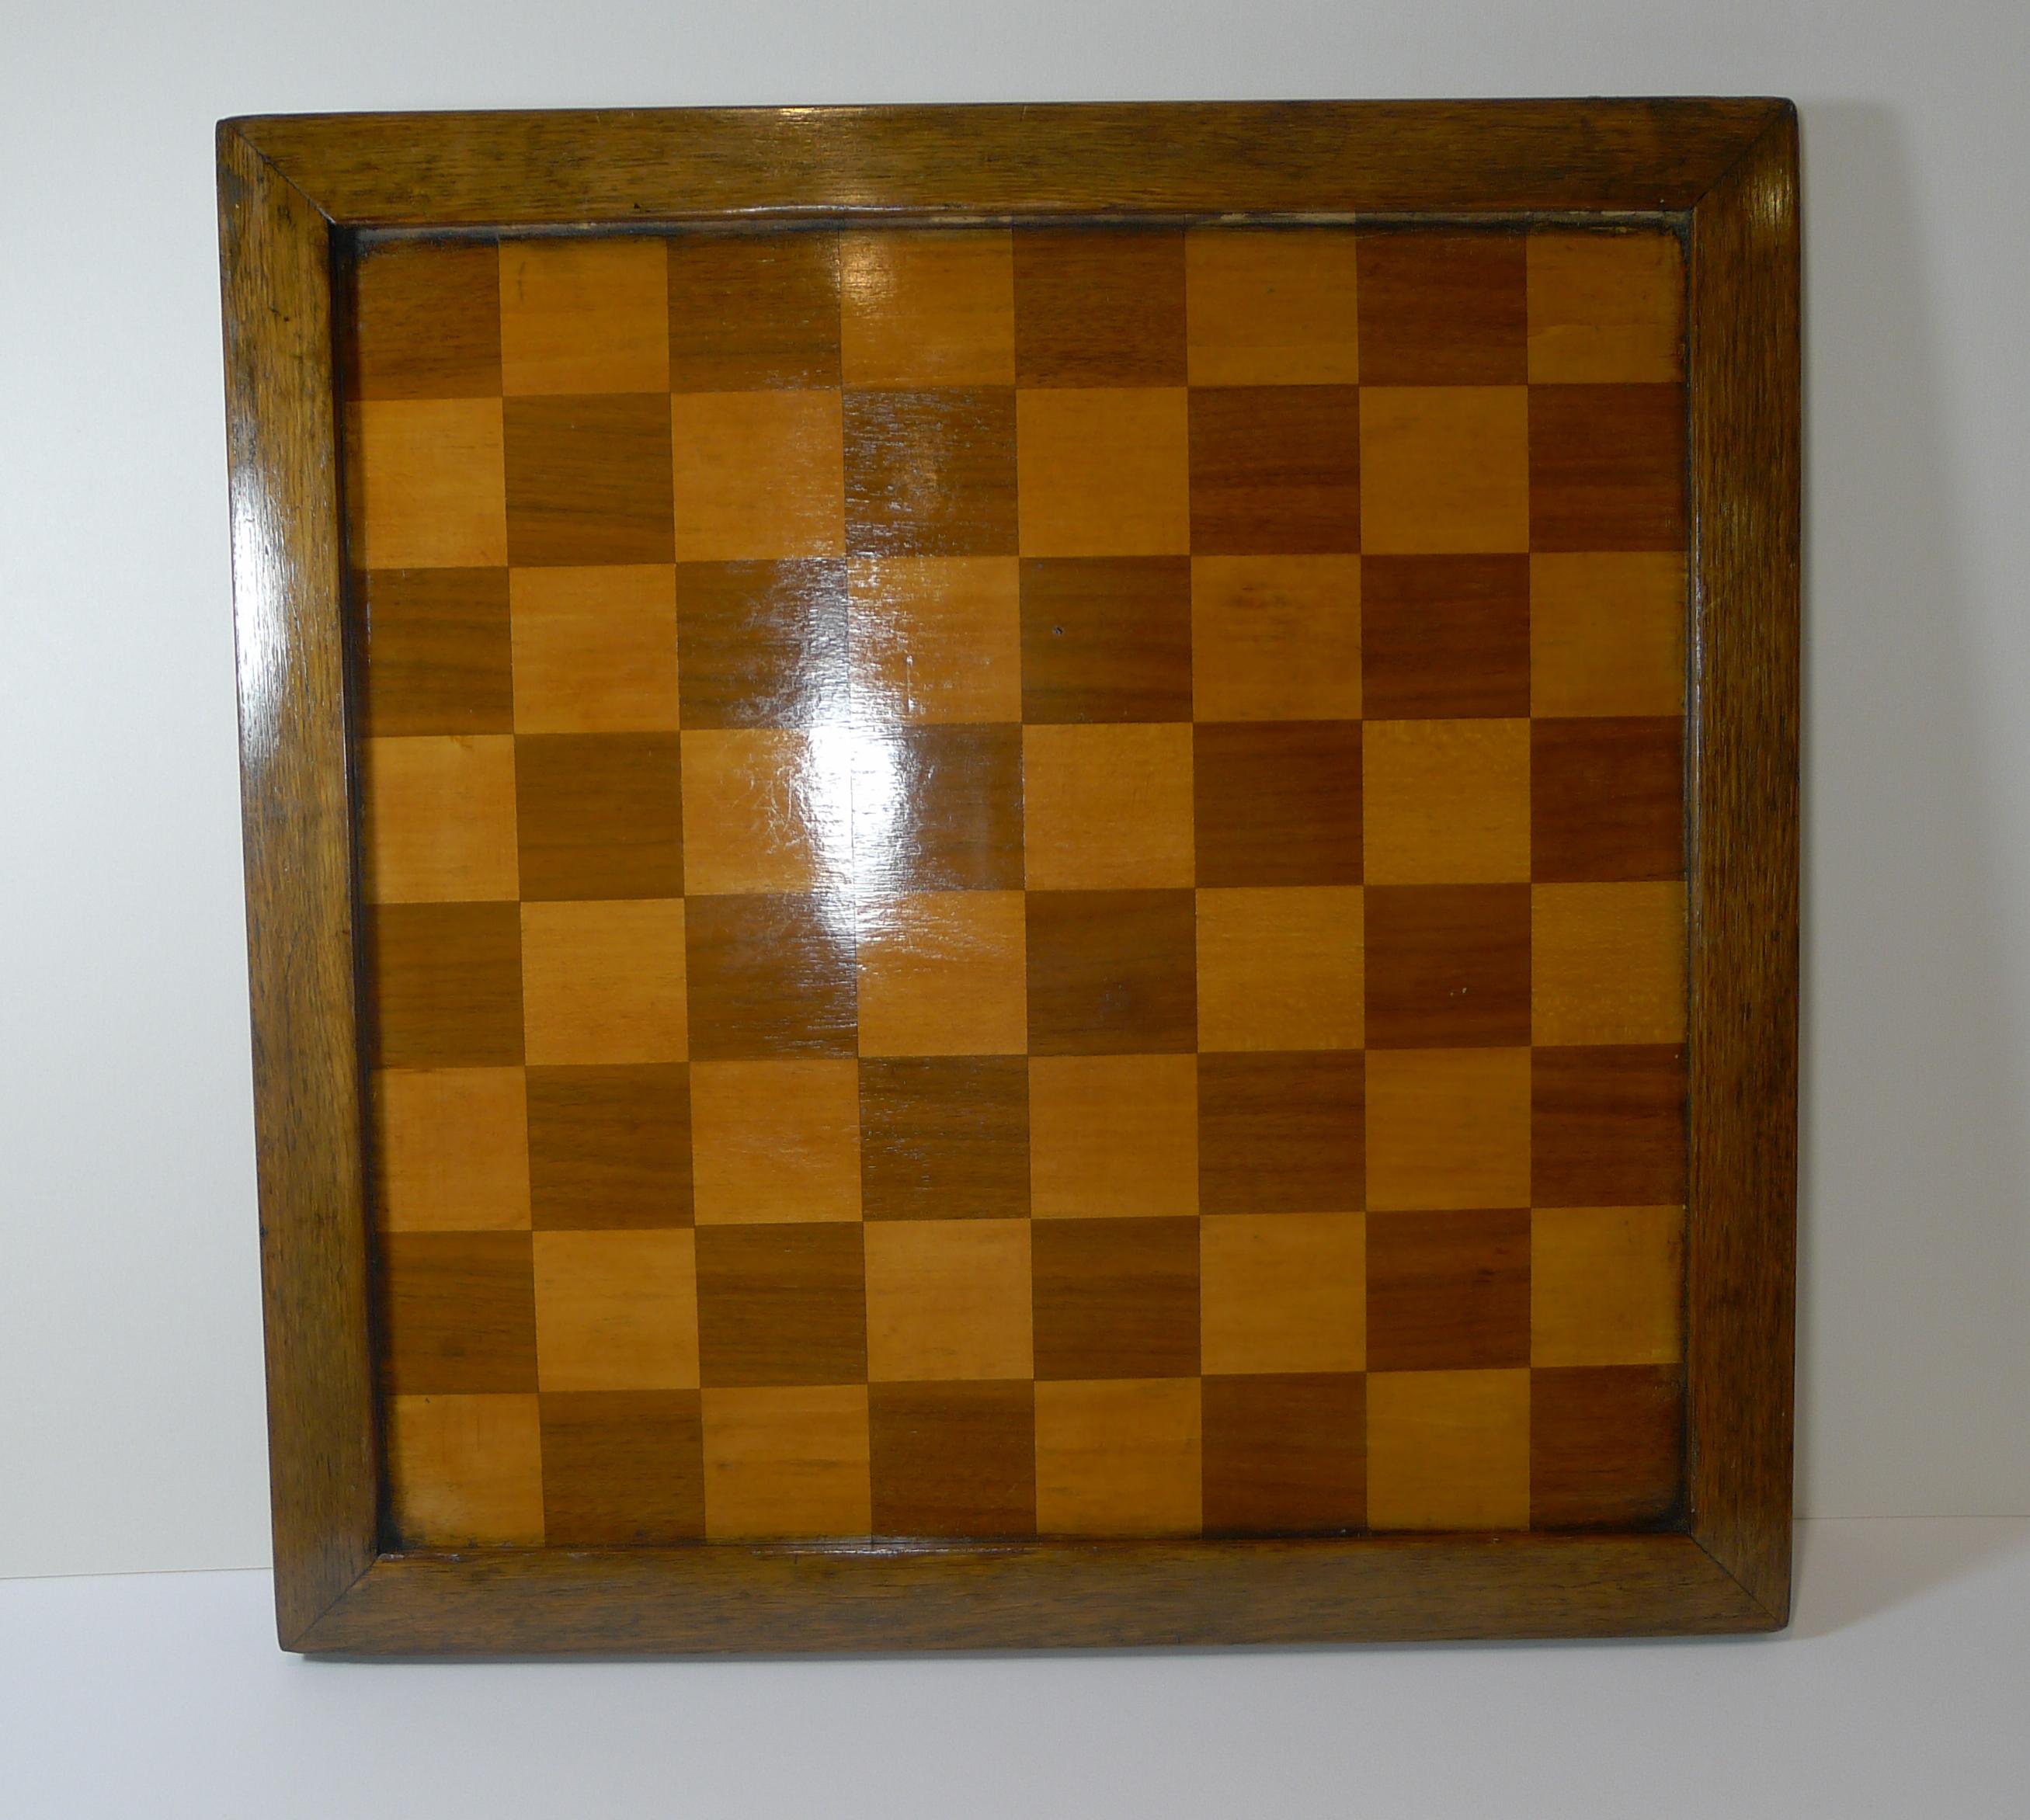 A handsome large English chess board consisting of two separate boards, one each side, one for Chess or Draughts, the other for French Draughts or Checkers (Jeu de Dames) which consists of a 10 x 10 pattern (100 squares). The other side is of course